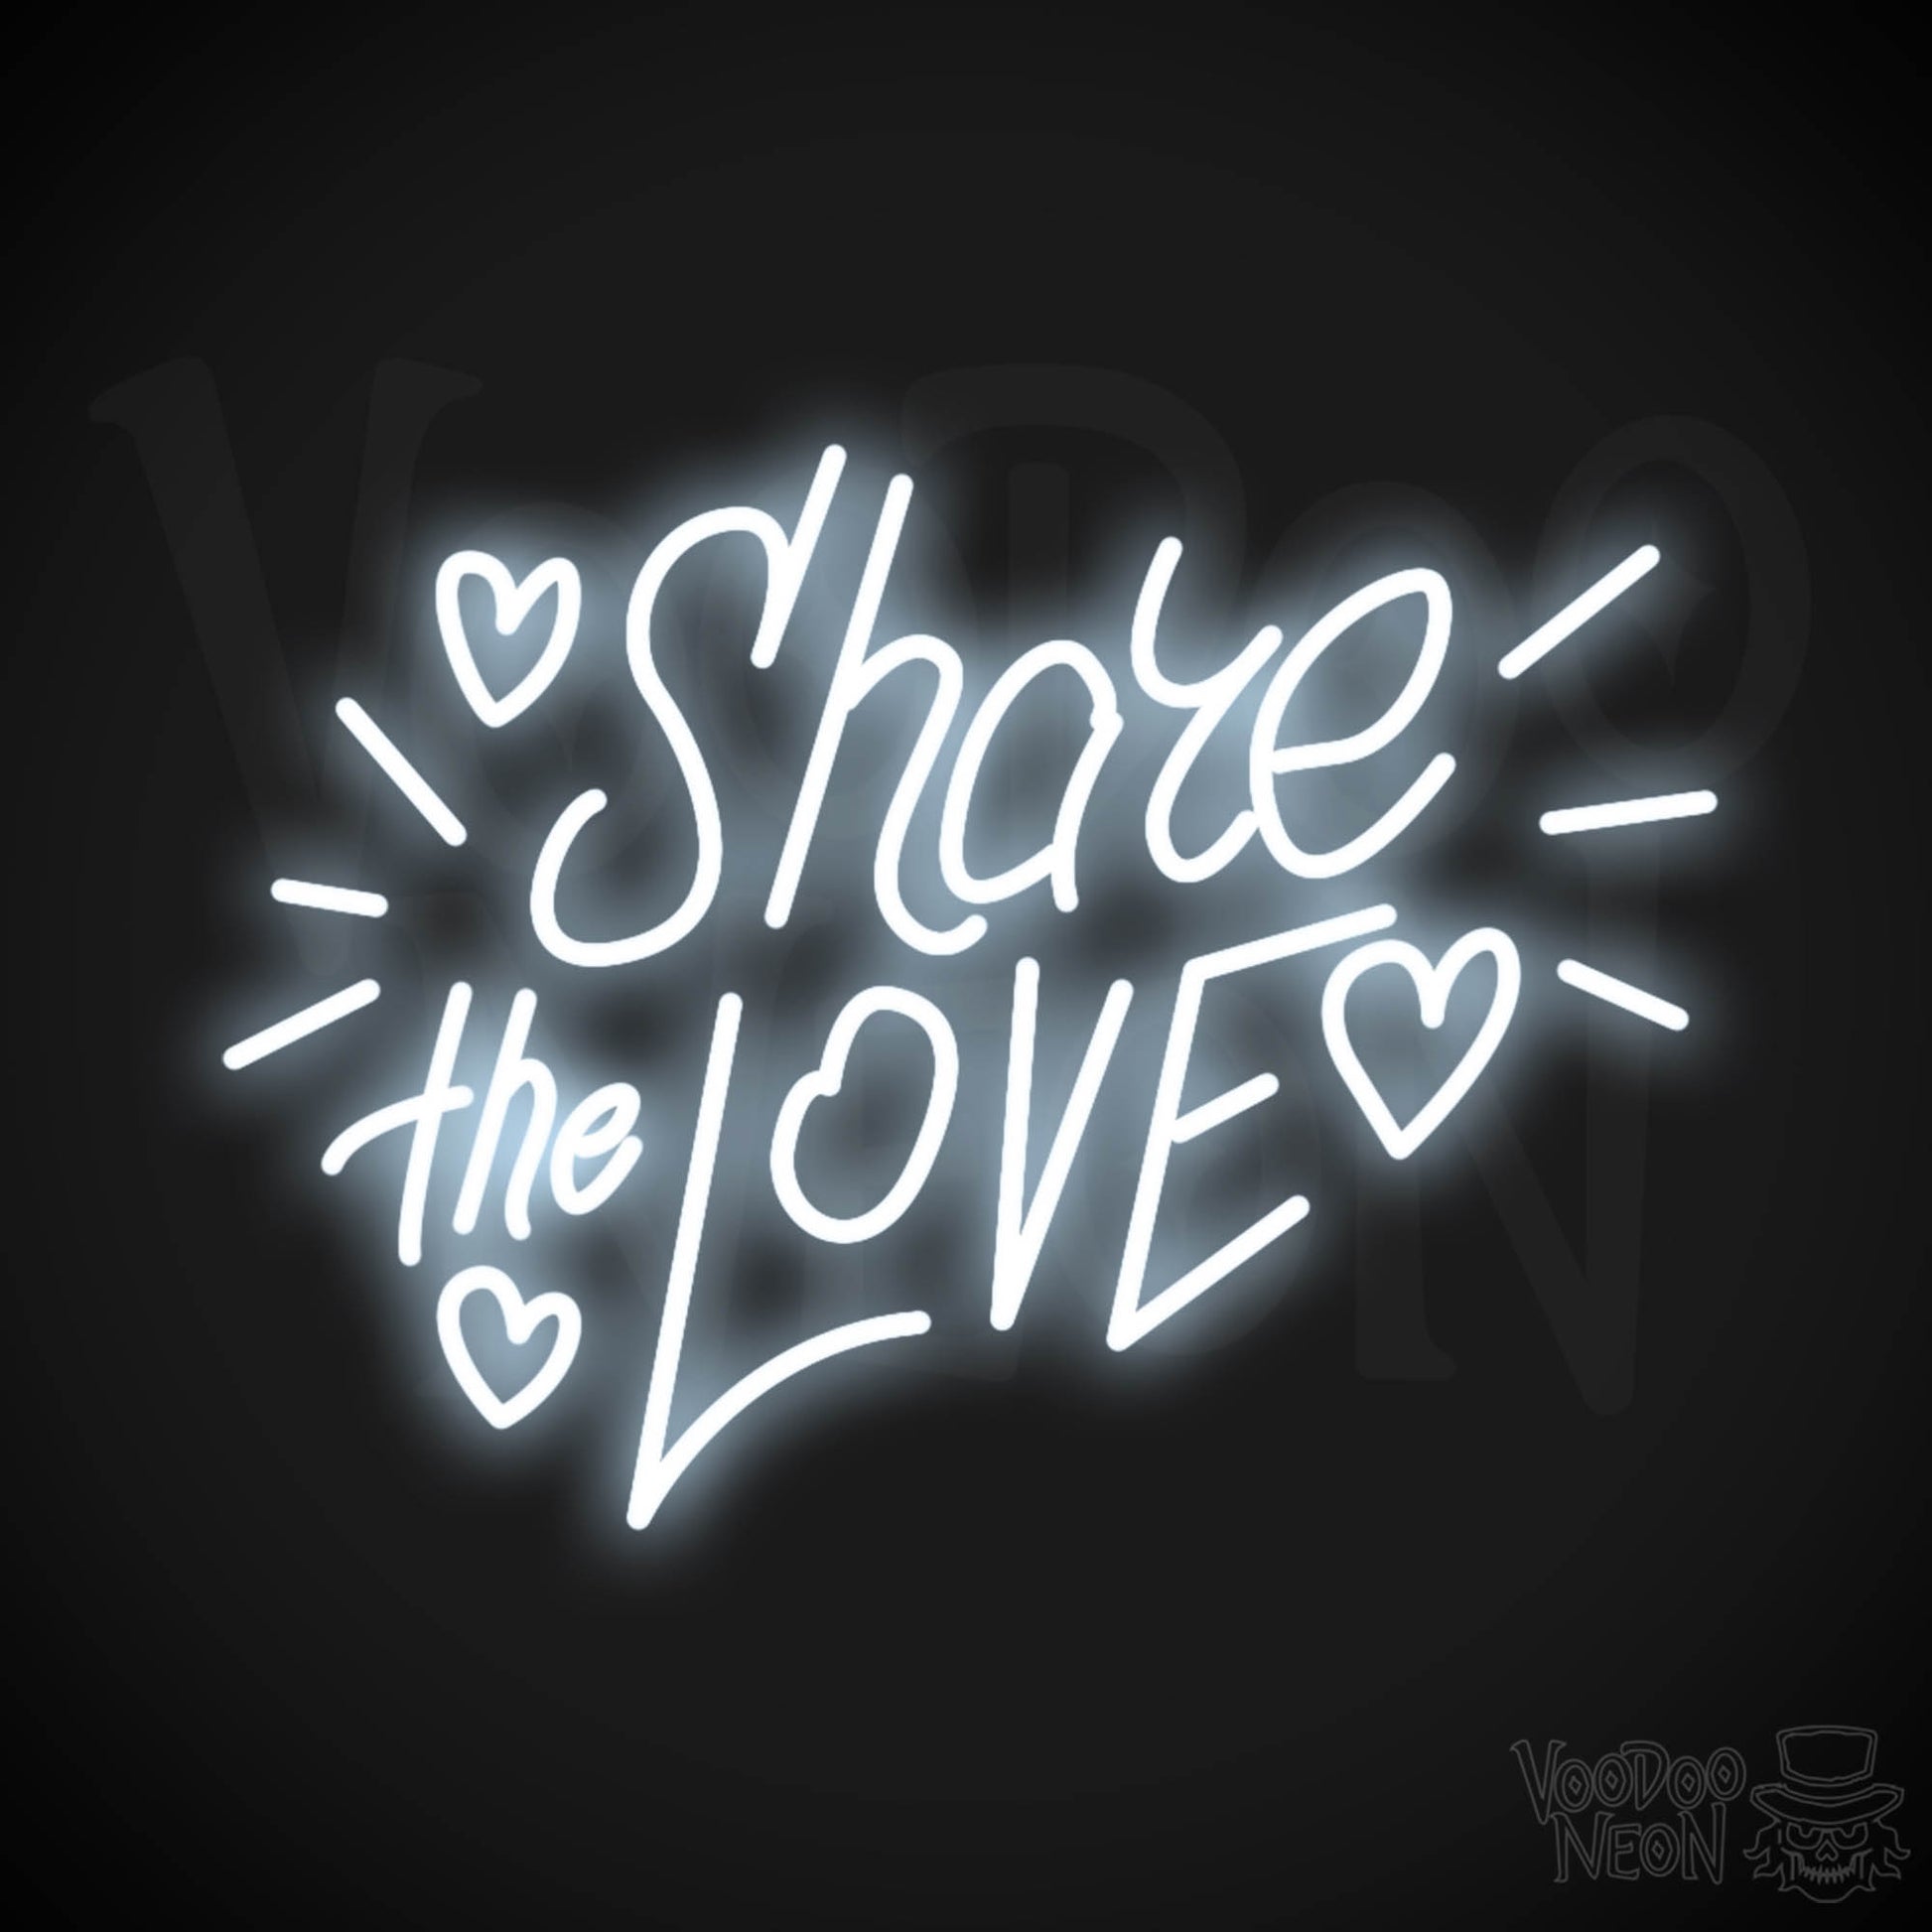 Share The Love Neon Sign - Neon Share The Love Sign - Color Cool White